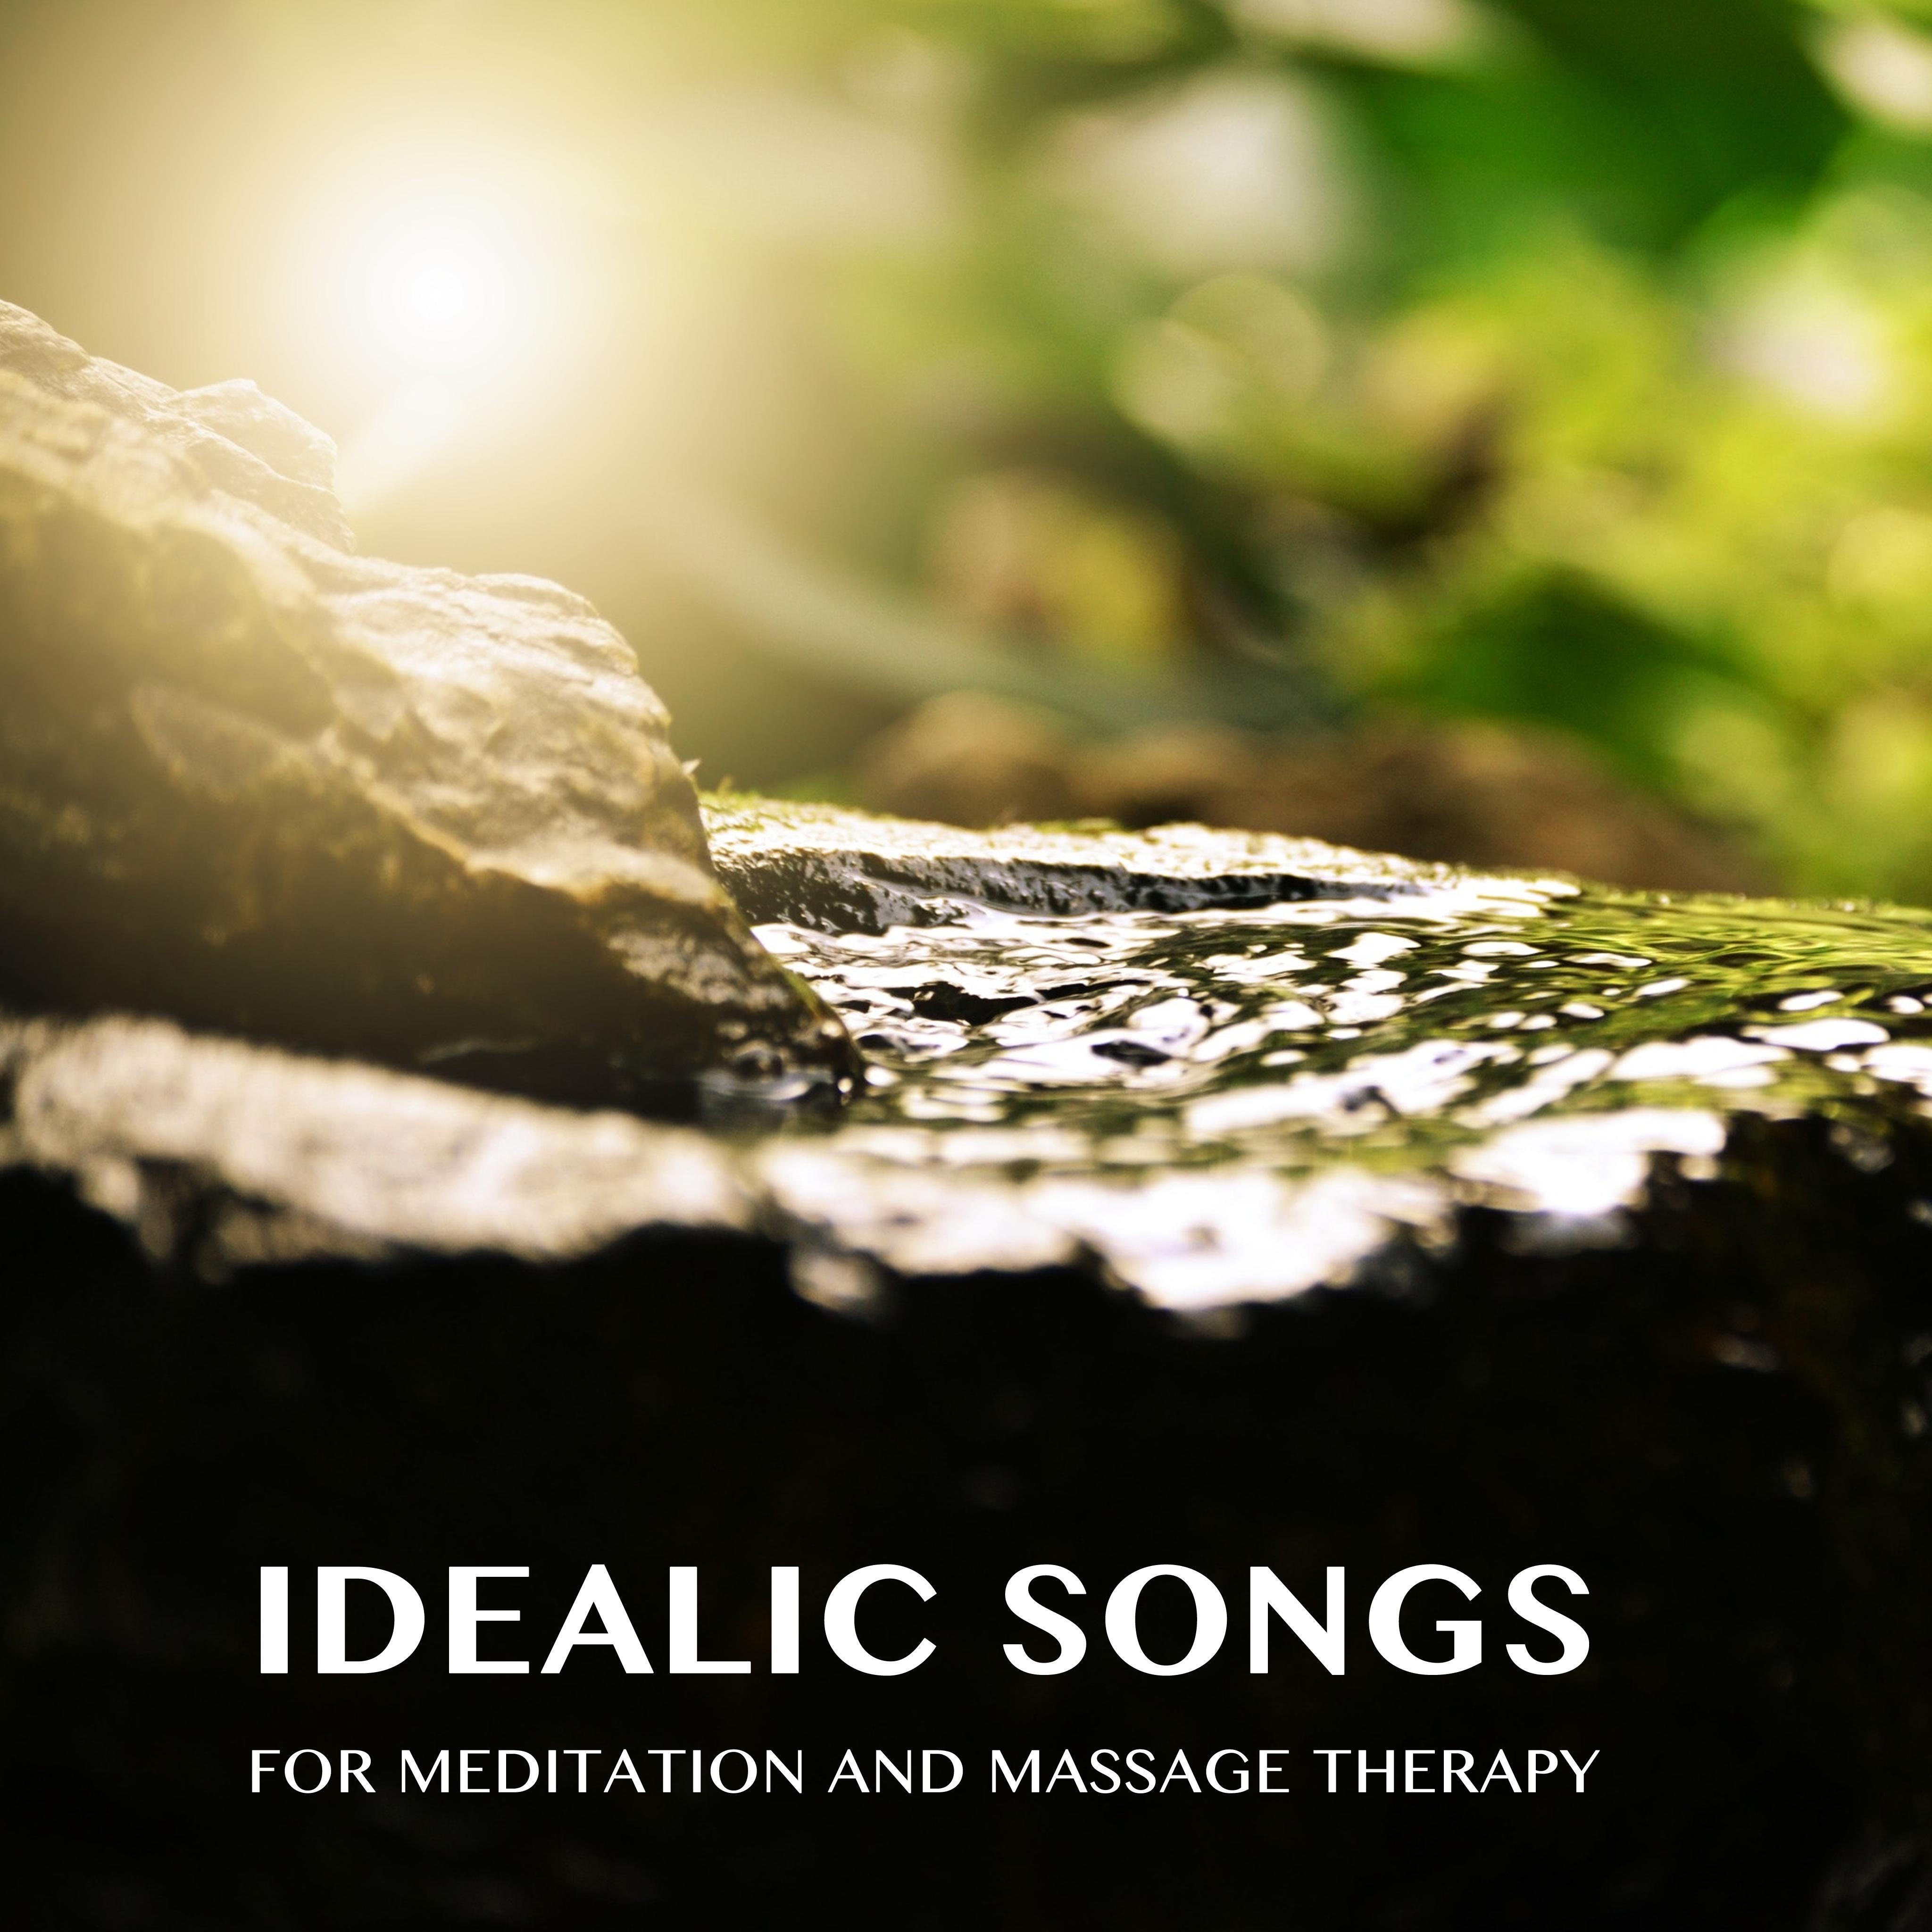 13 Idealic Songs for Meditation and Massage Therapy